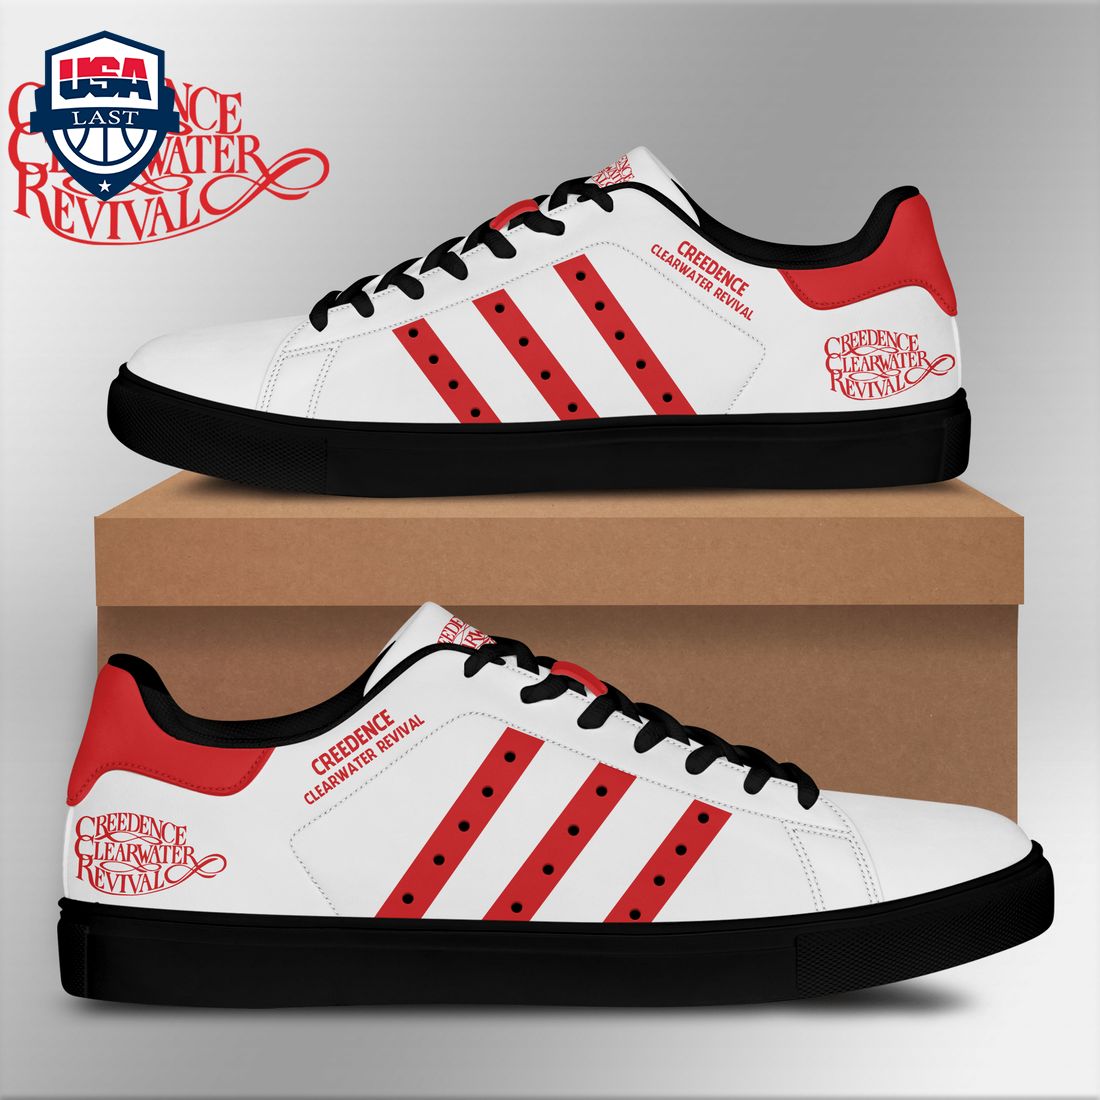 creedence-clearwater-revival-red-stripes-style-1-stan-smith-low-top-shoes-1-rN0KC.jpg